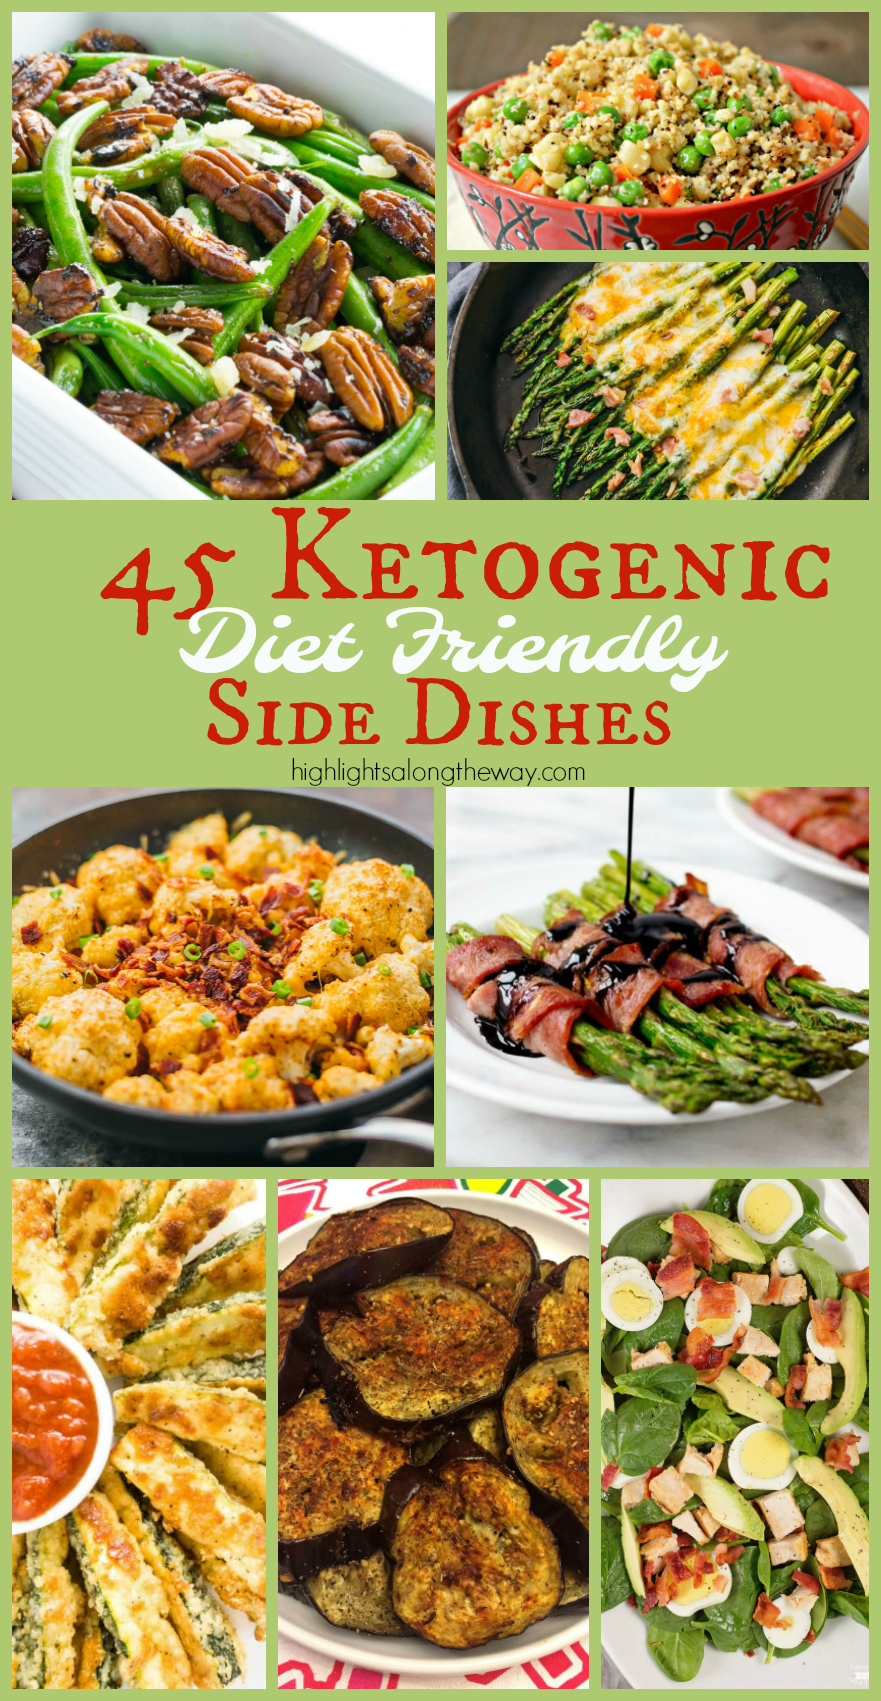 Keto Side Dishes Collage Image - Pin